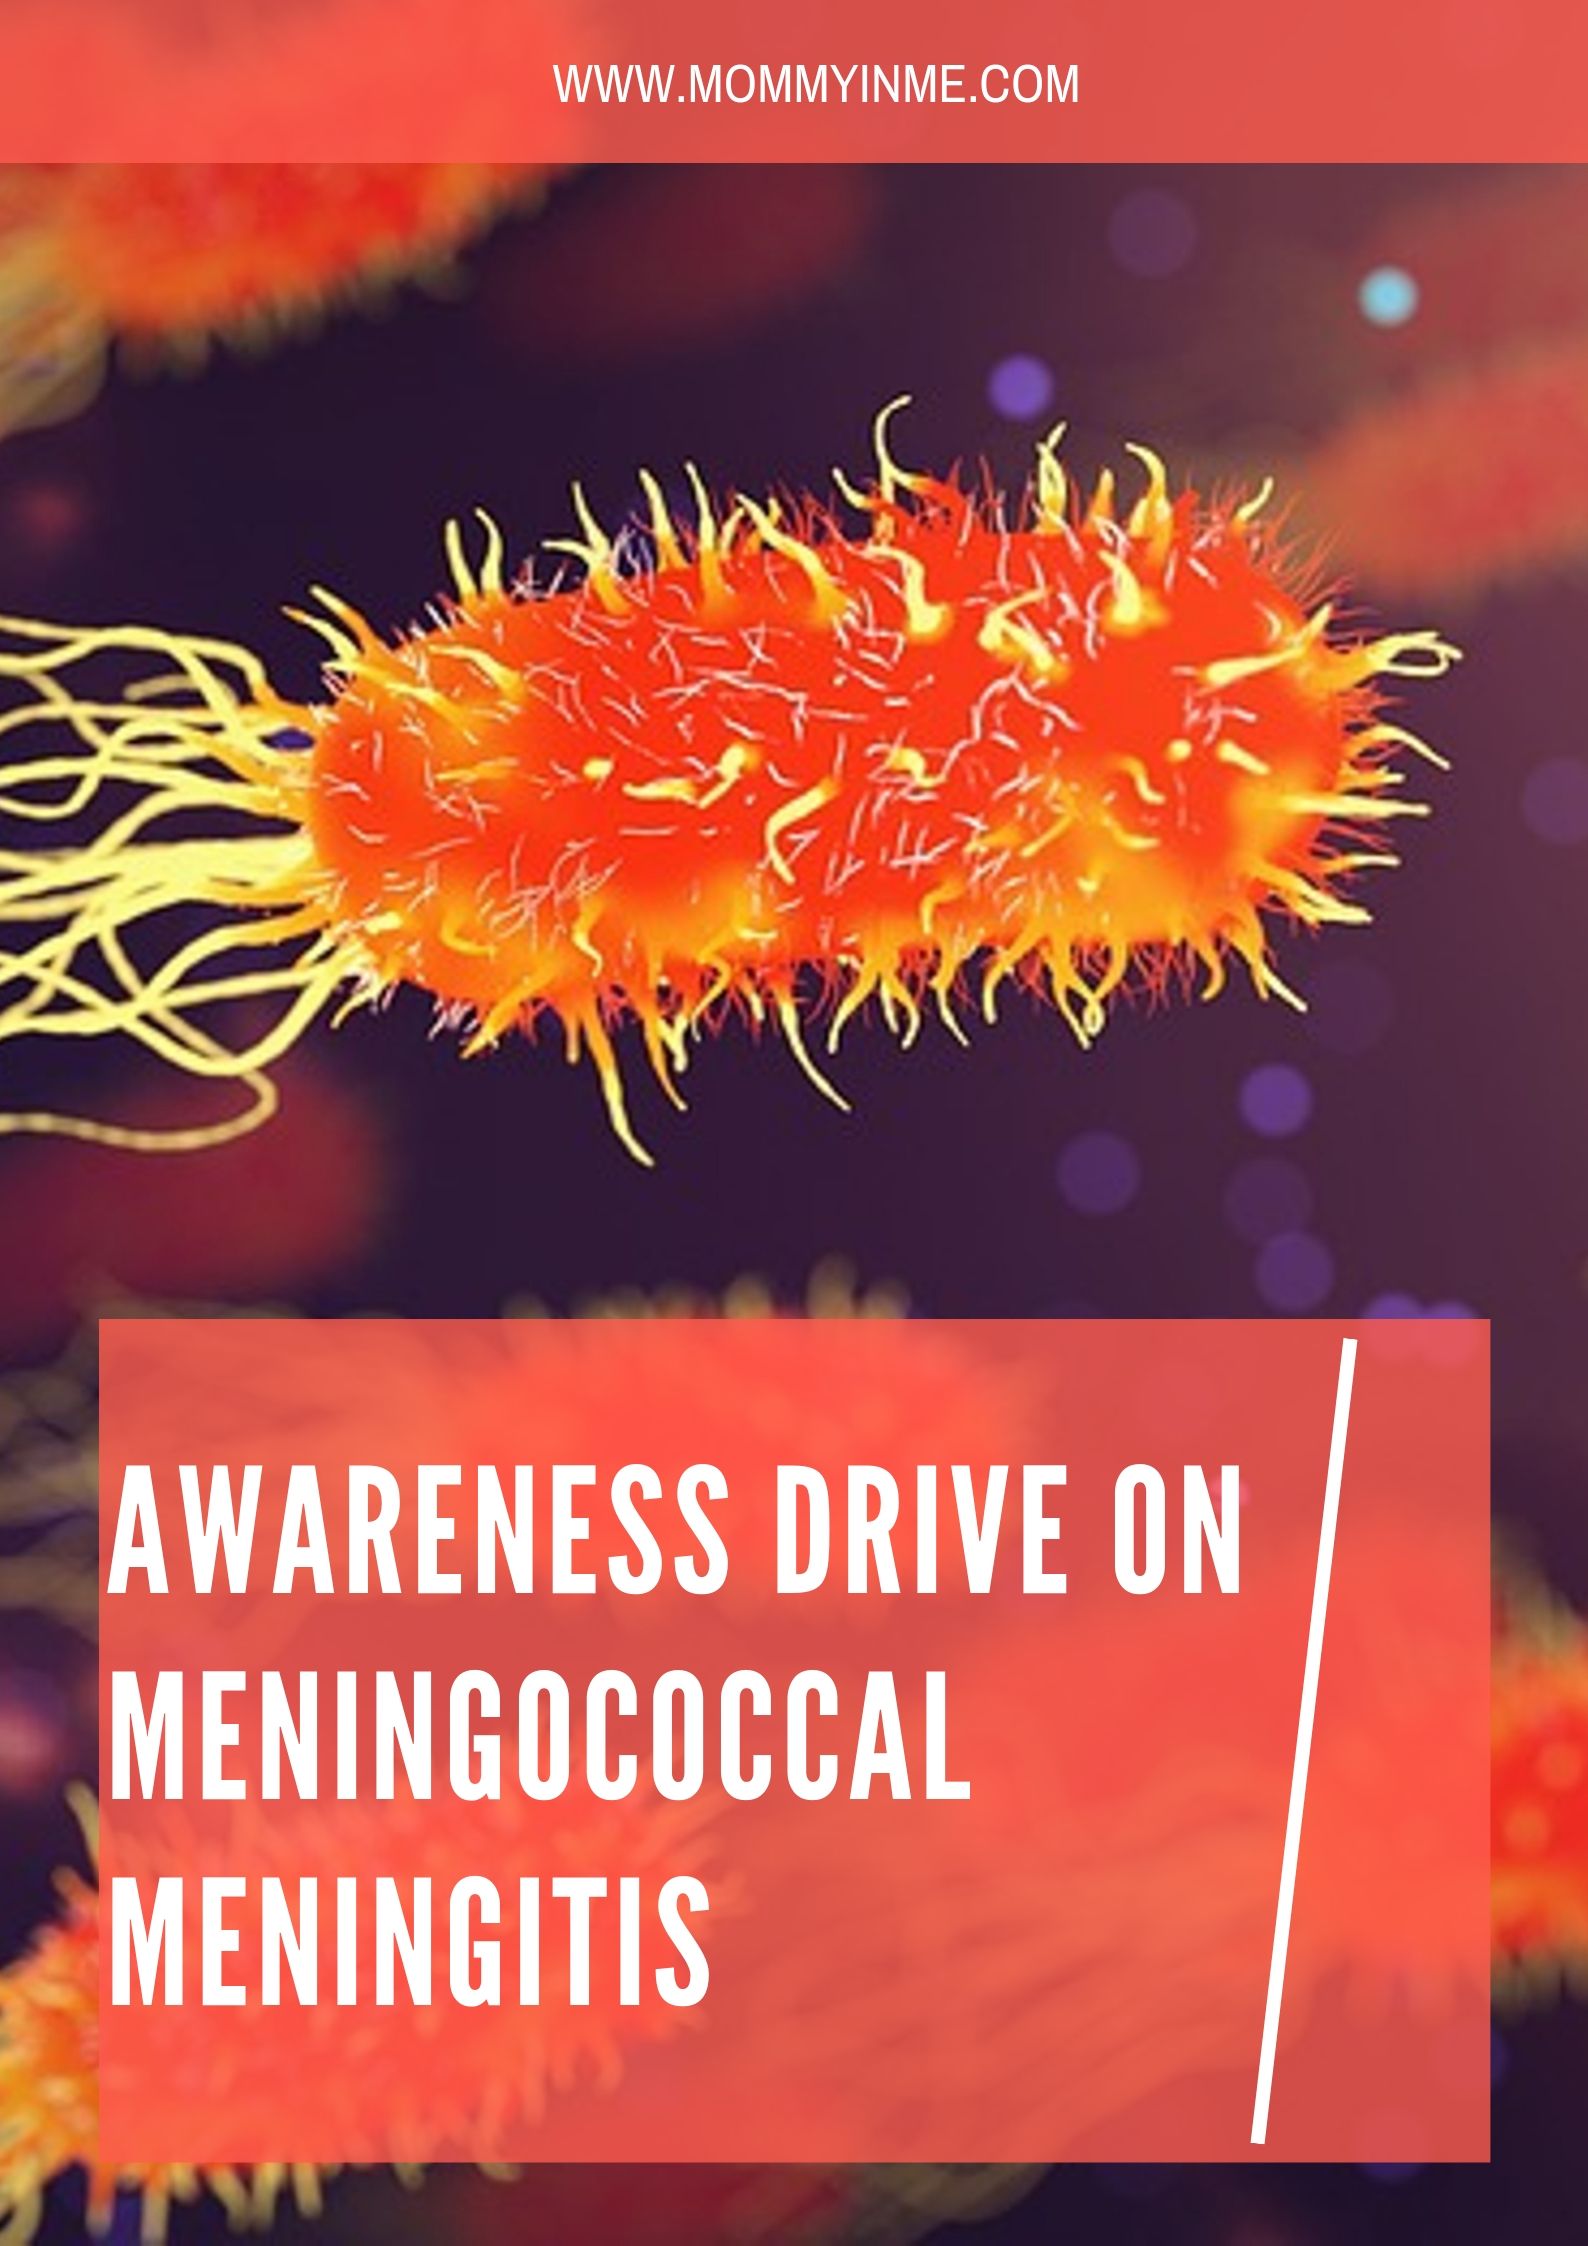 Its time to raise awareness for Meningococcal Meningitis, a bacterial Brain Infection in Children and Adolescents. Read this post on how to remain safe against Meningococcal meningitis. #Meningococcalmeningitis #meningitis #brainfever #bacterialinfection #IMDAware #TogetherAgainstMeningitis